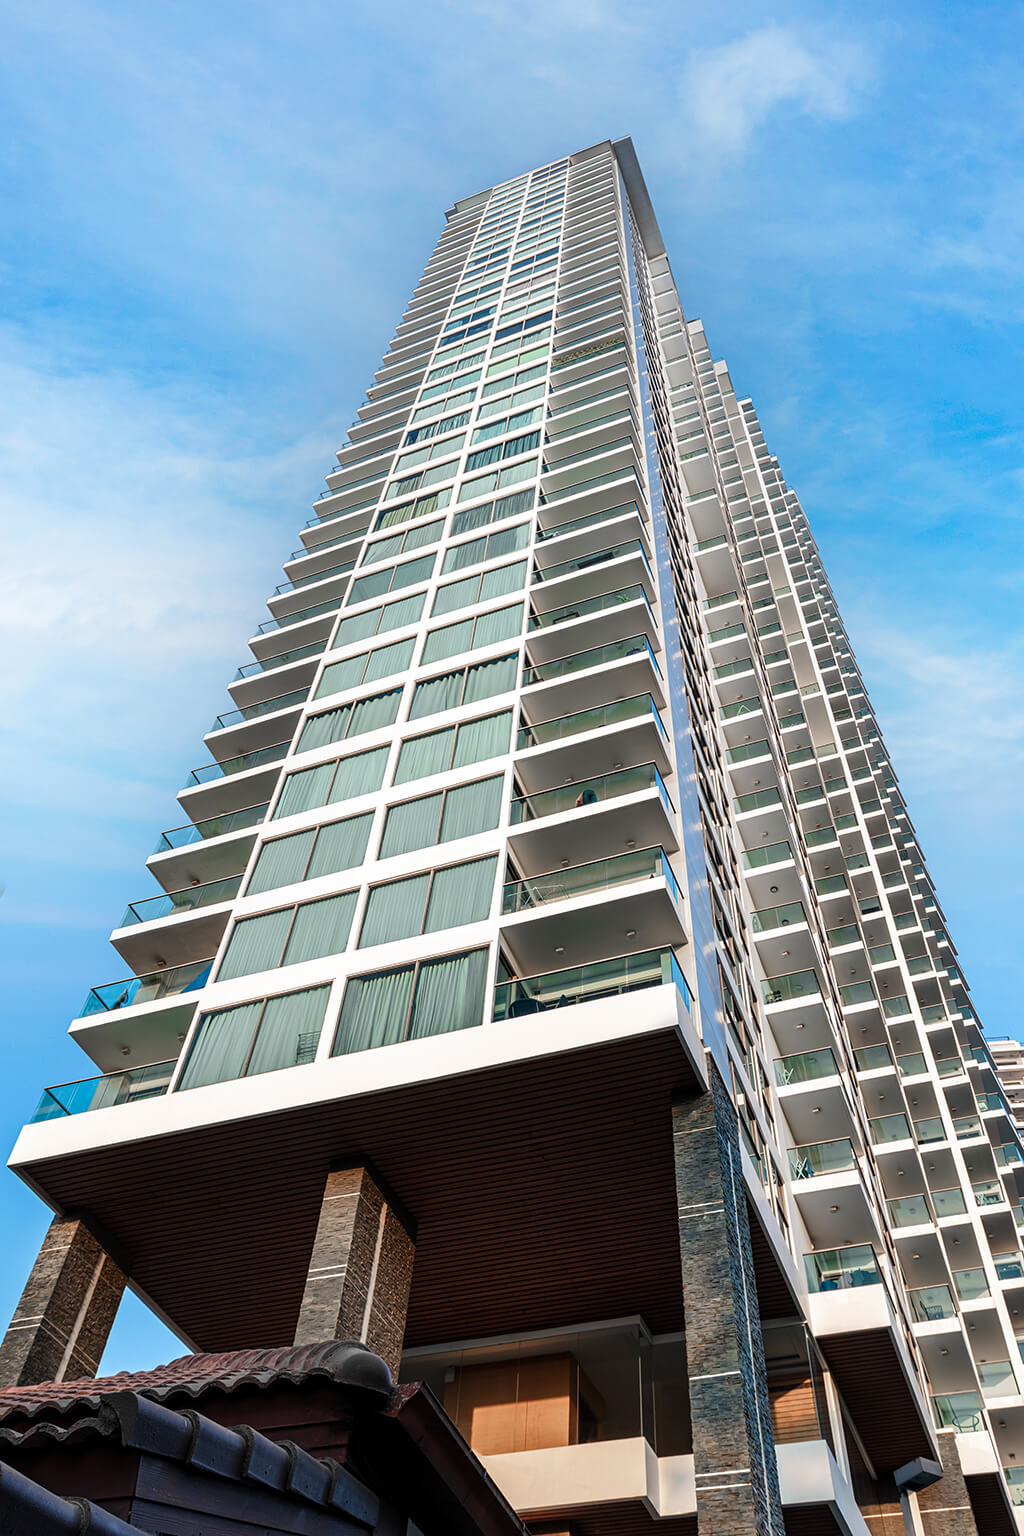 Rendered image of the Wong Amat Tower by Mario Kleff